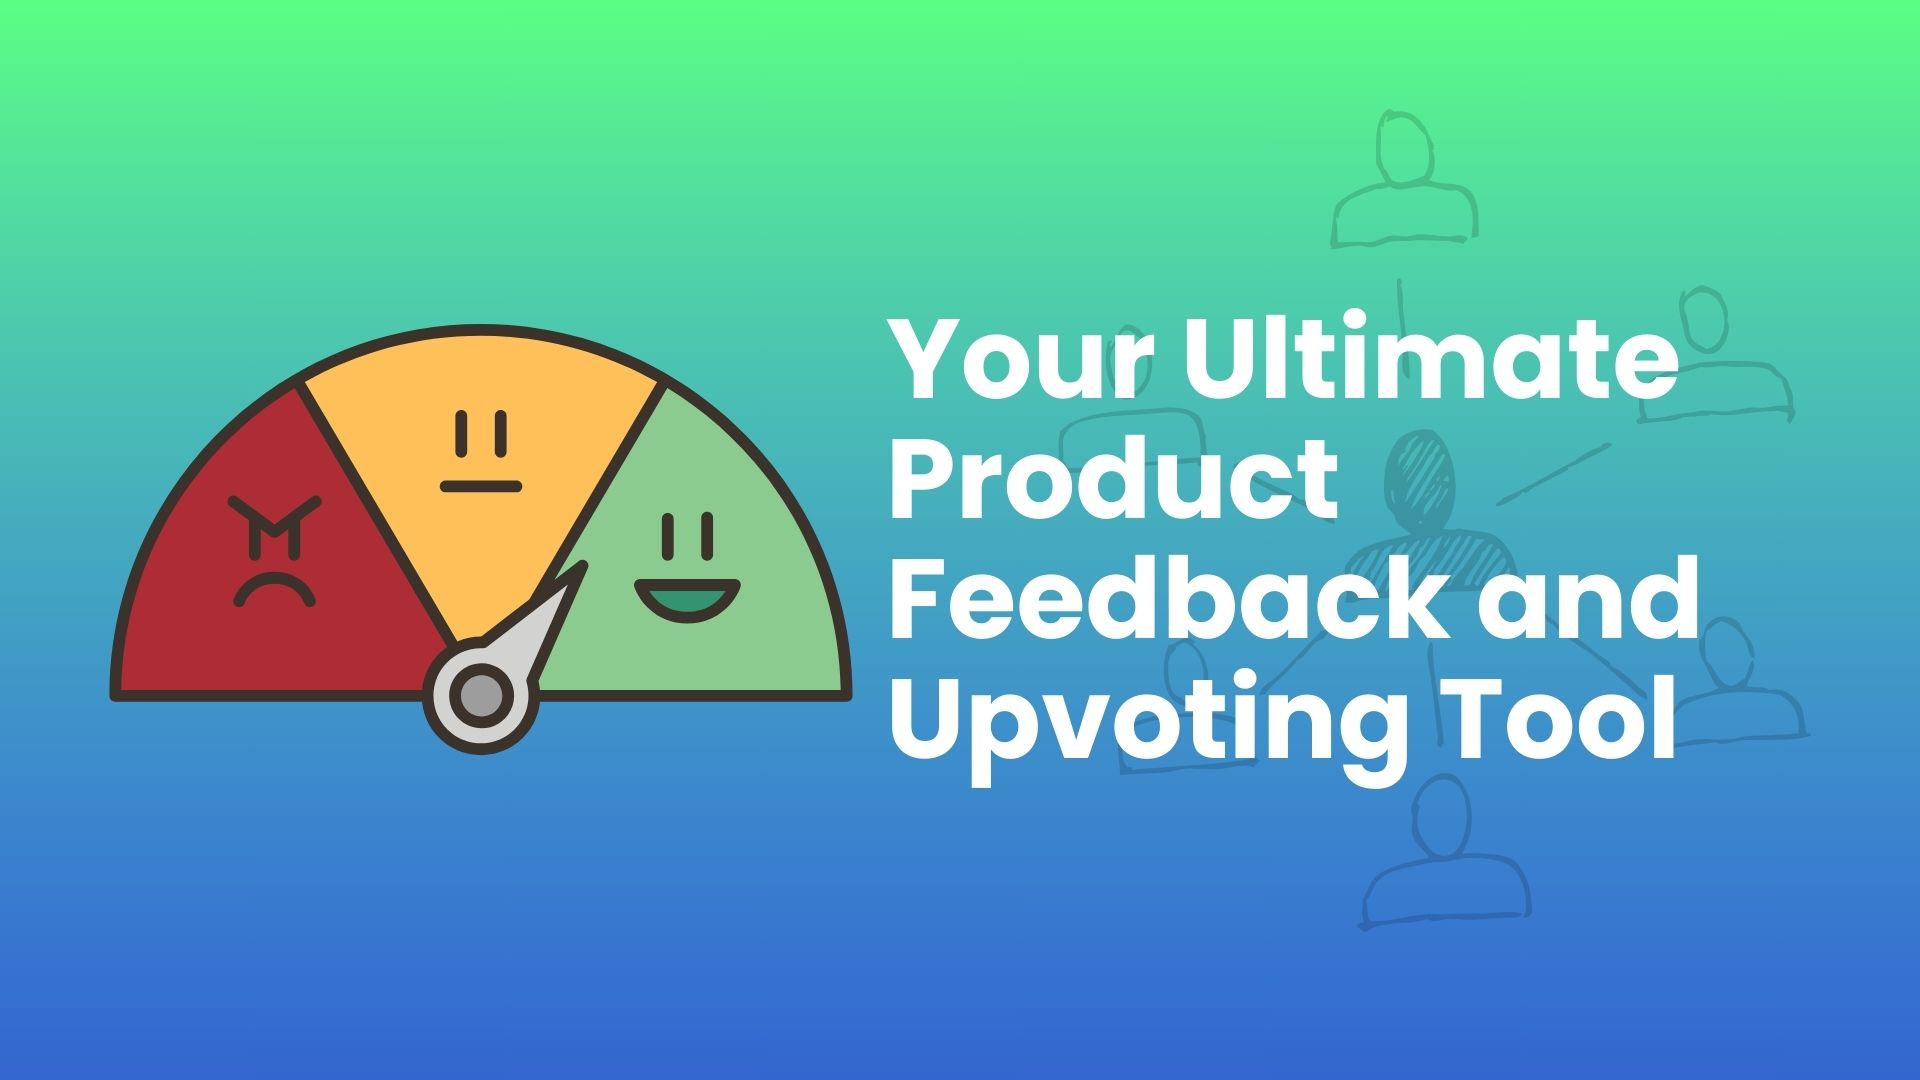 Your Ultimate Product Feedback and Upvoting Tool